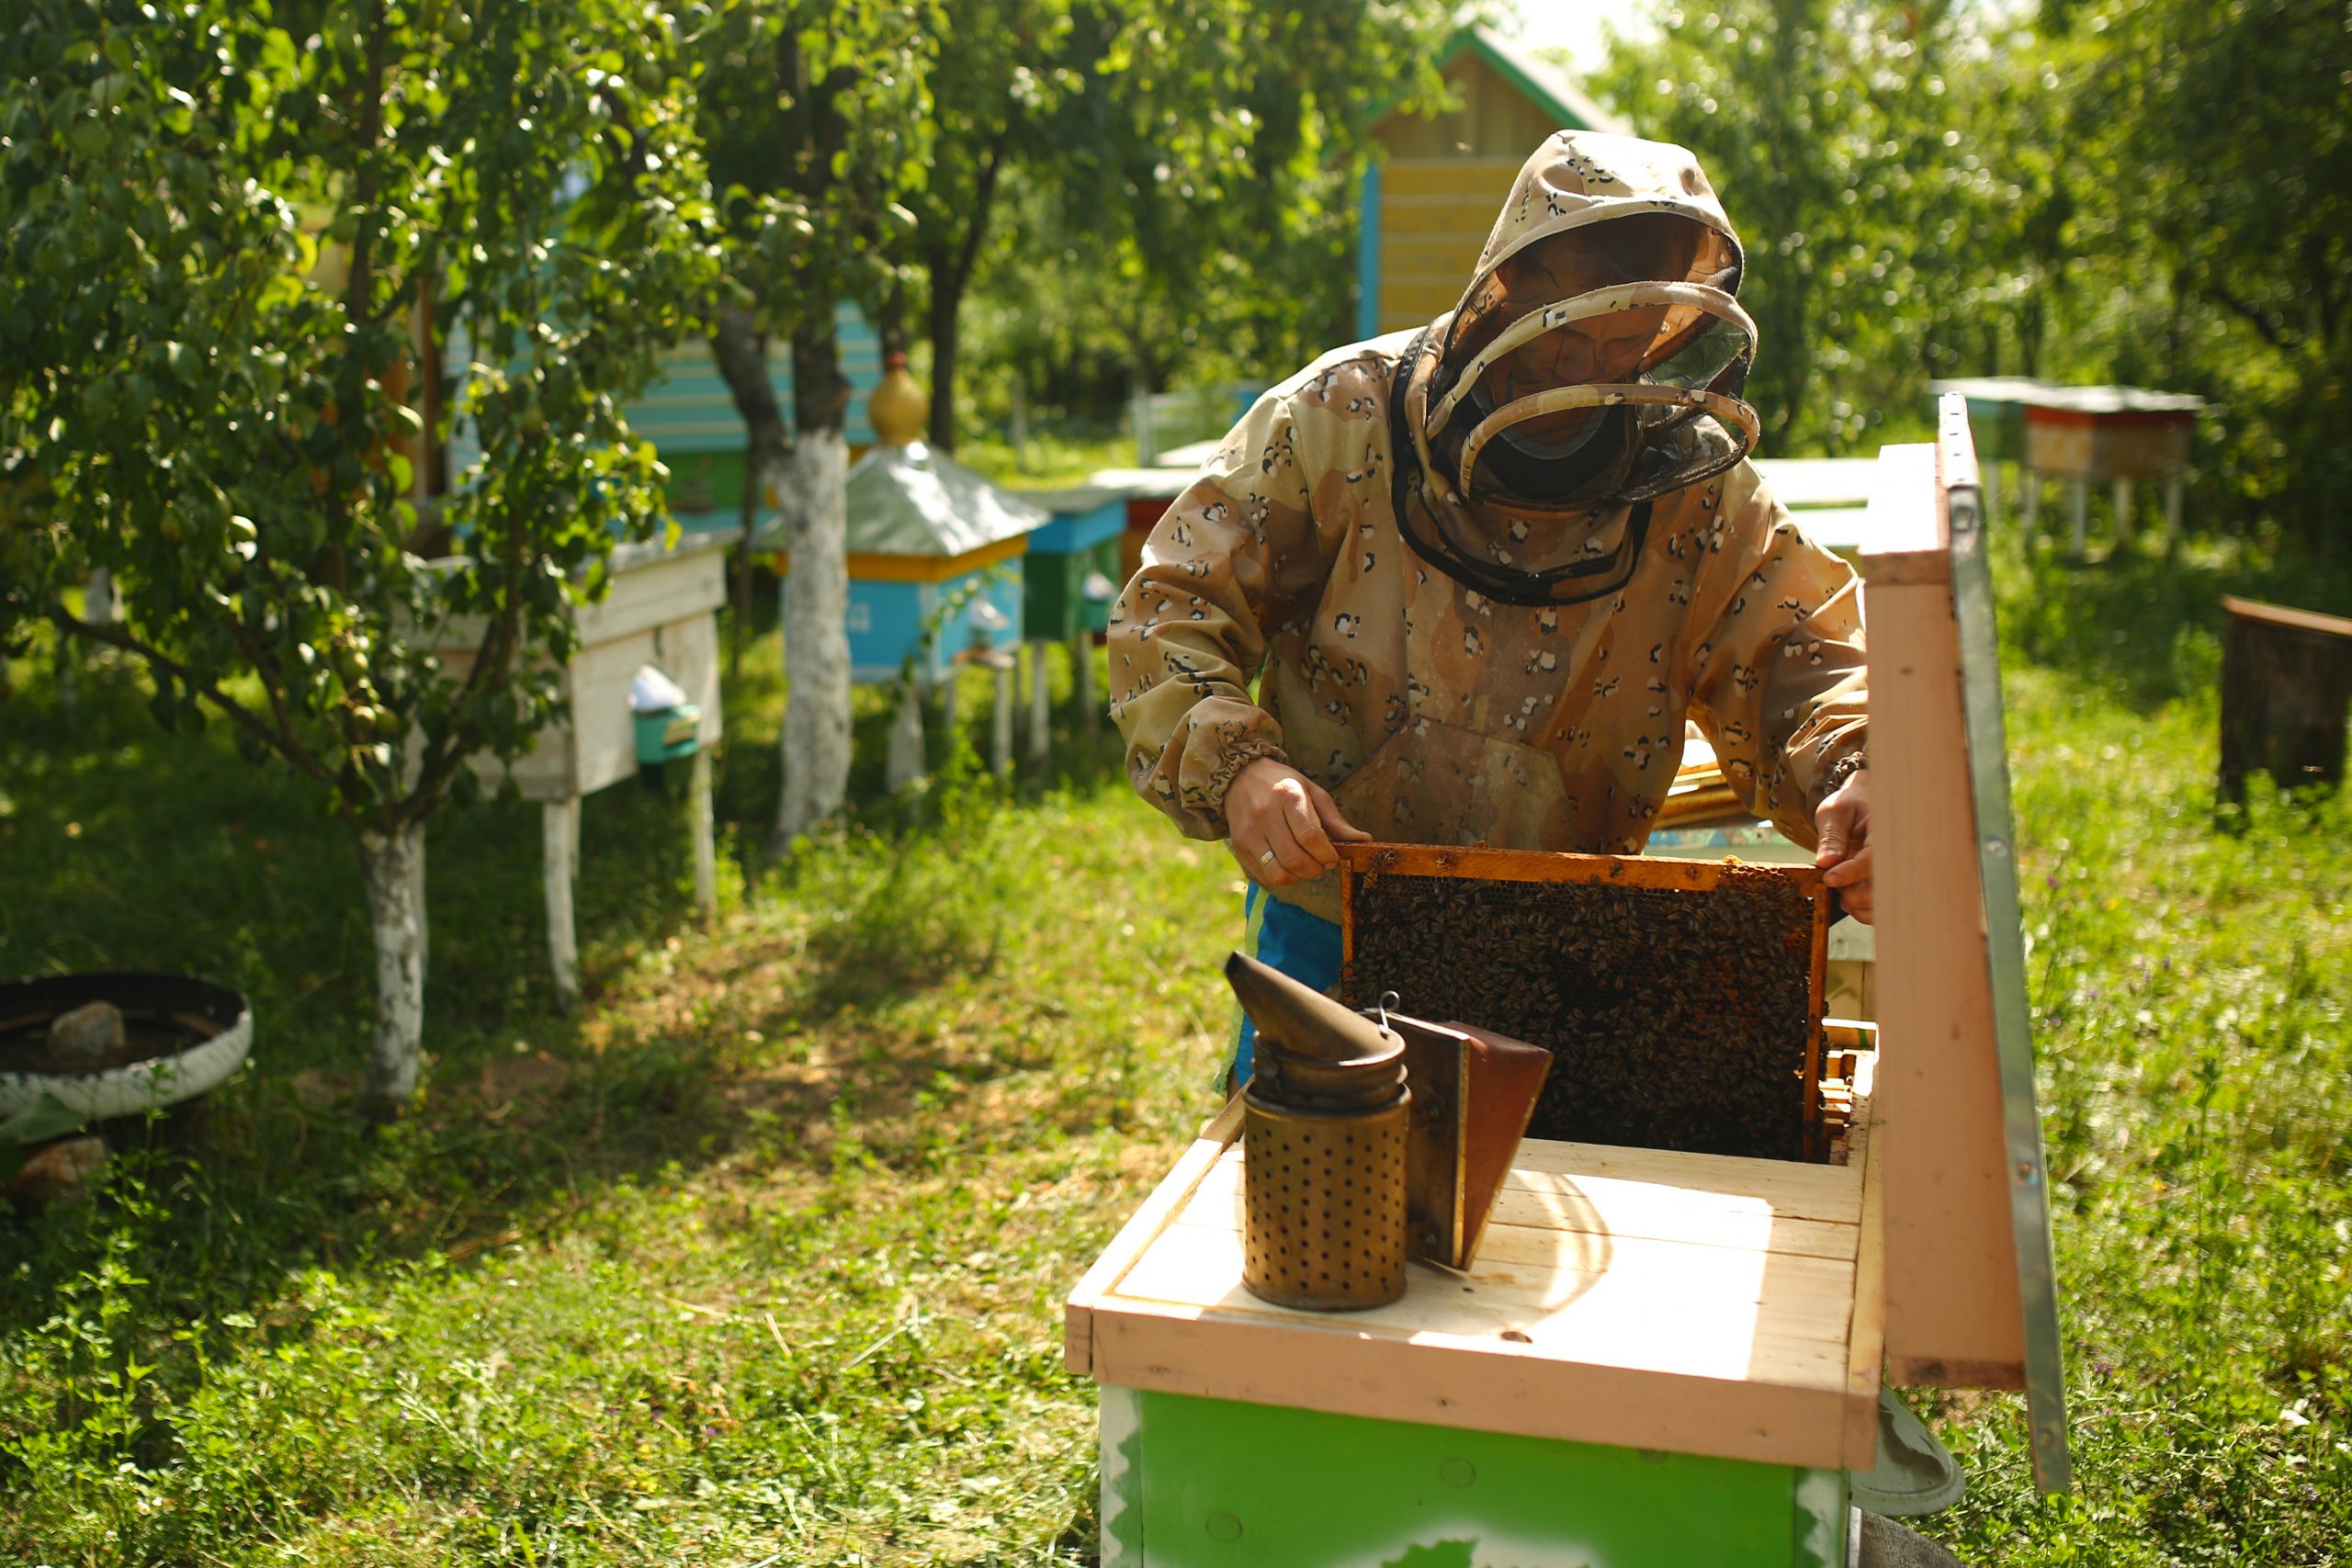 When He is Not Saving Lives, He is Making Honey!